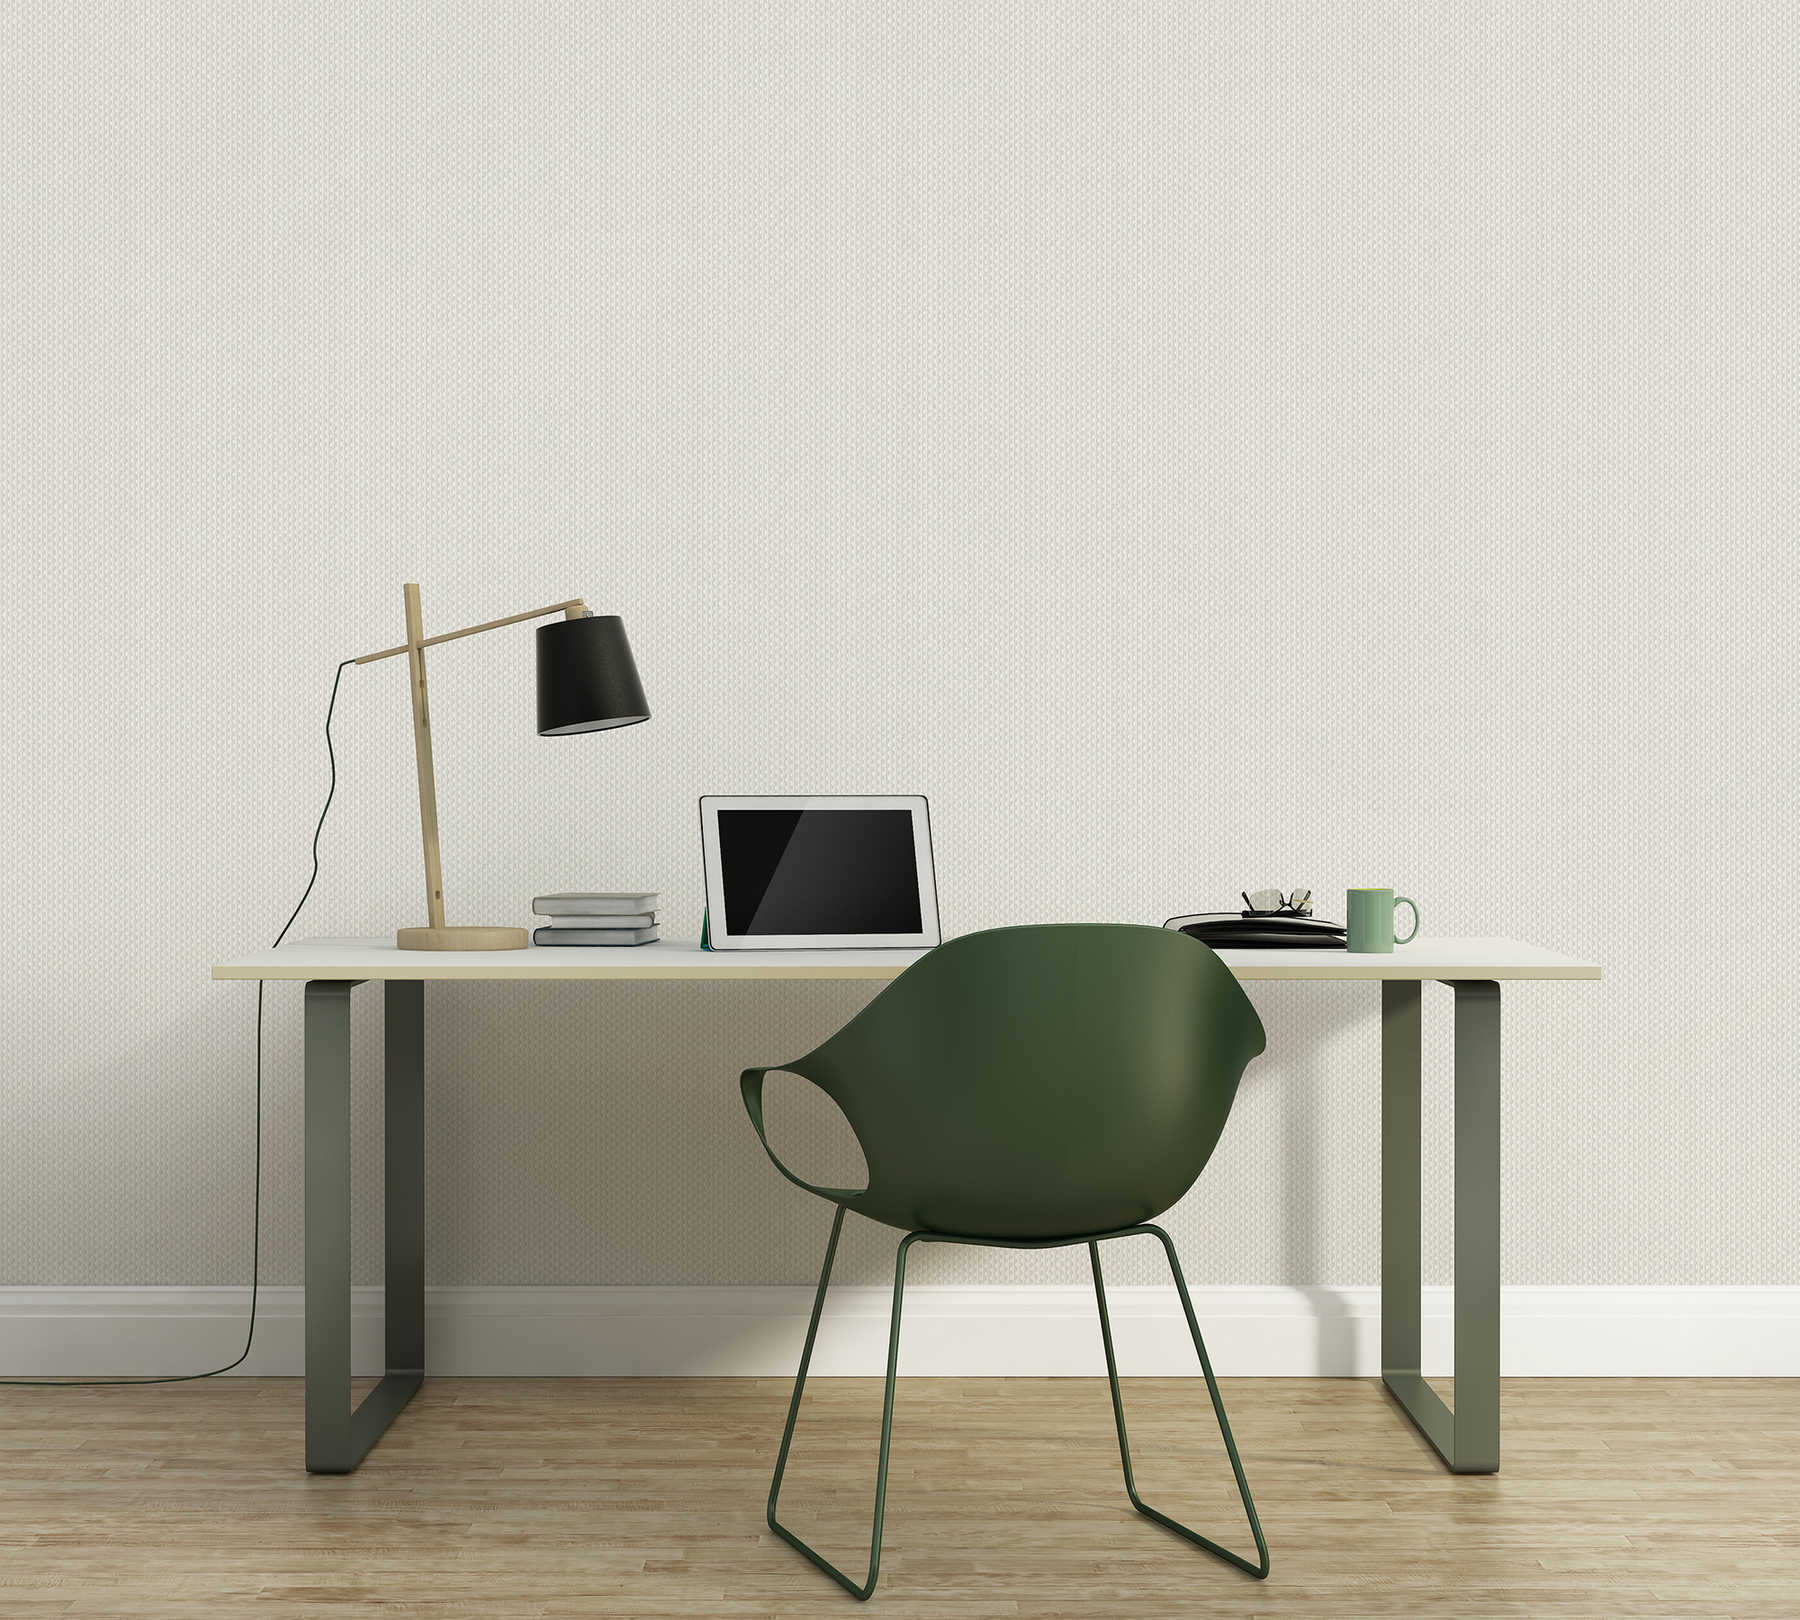             Glass-fibre wallpaper with coarse double warp - dimensionally stable, can be painted over several times
        